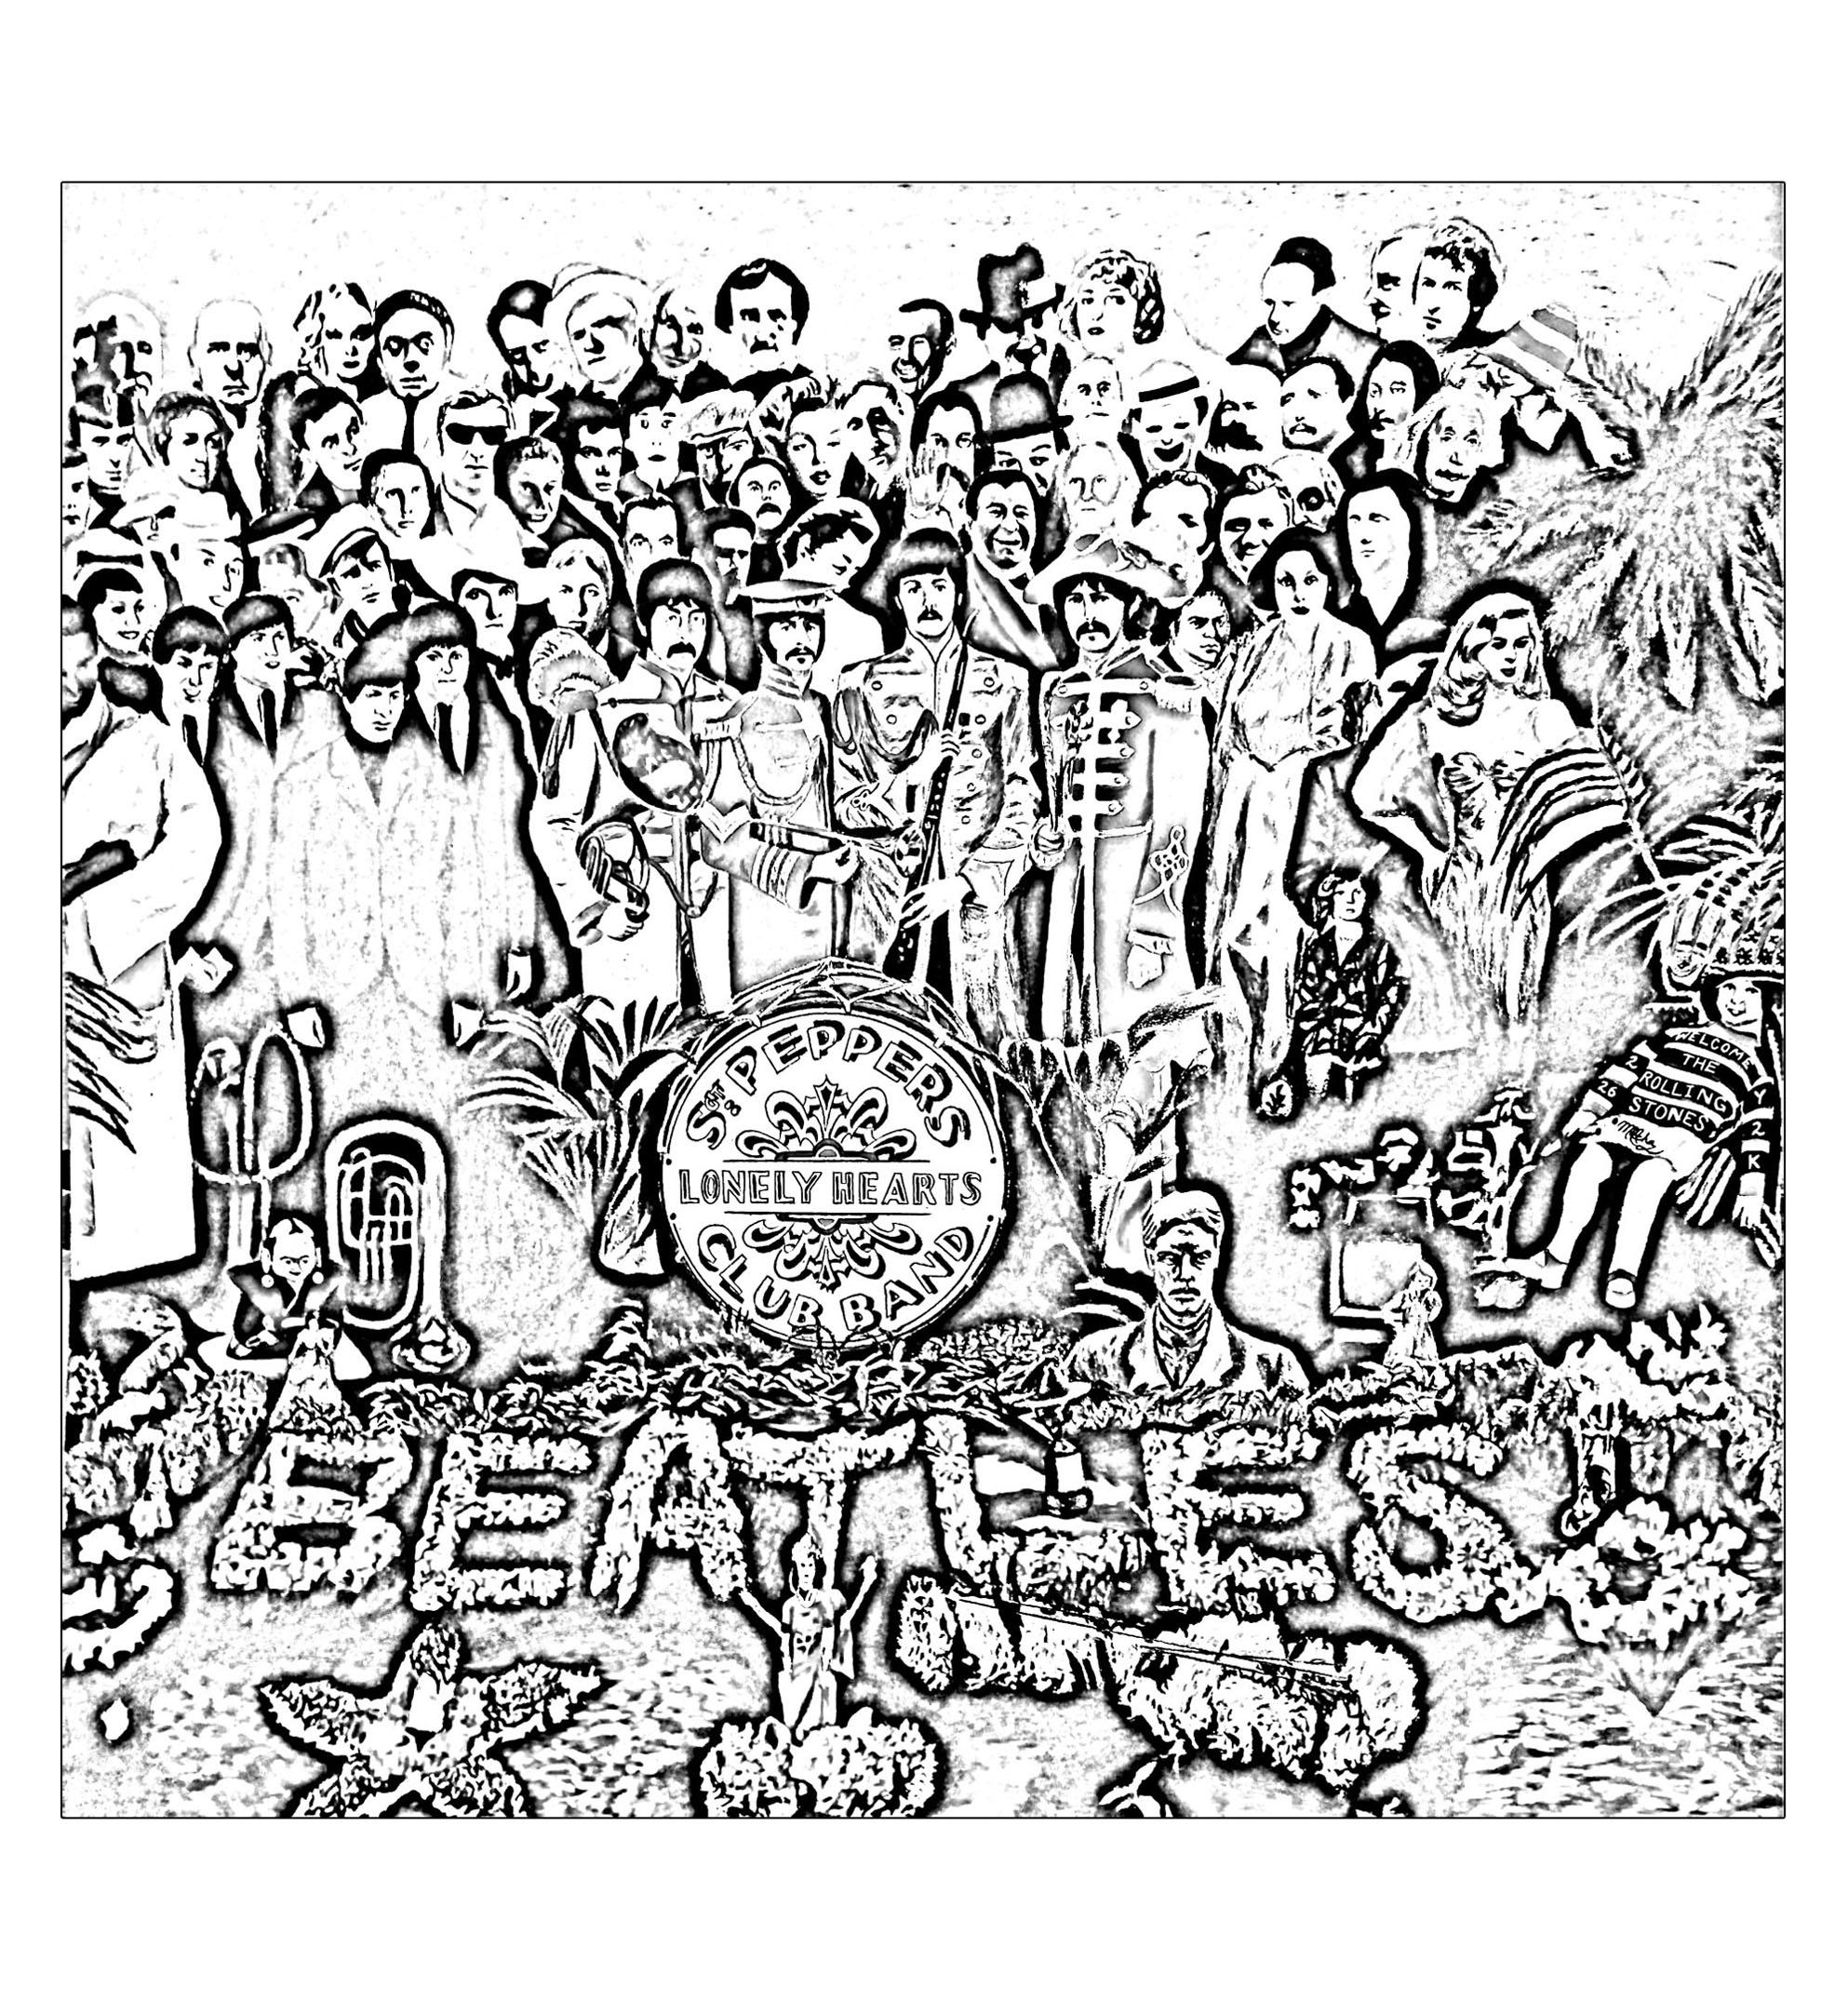 Download The beatles sgt peppers lonely hearts club band - Psychedelic Adult Coloring Pages